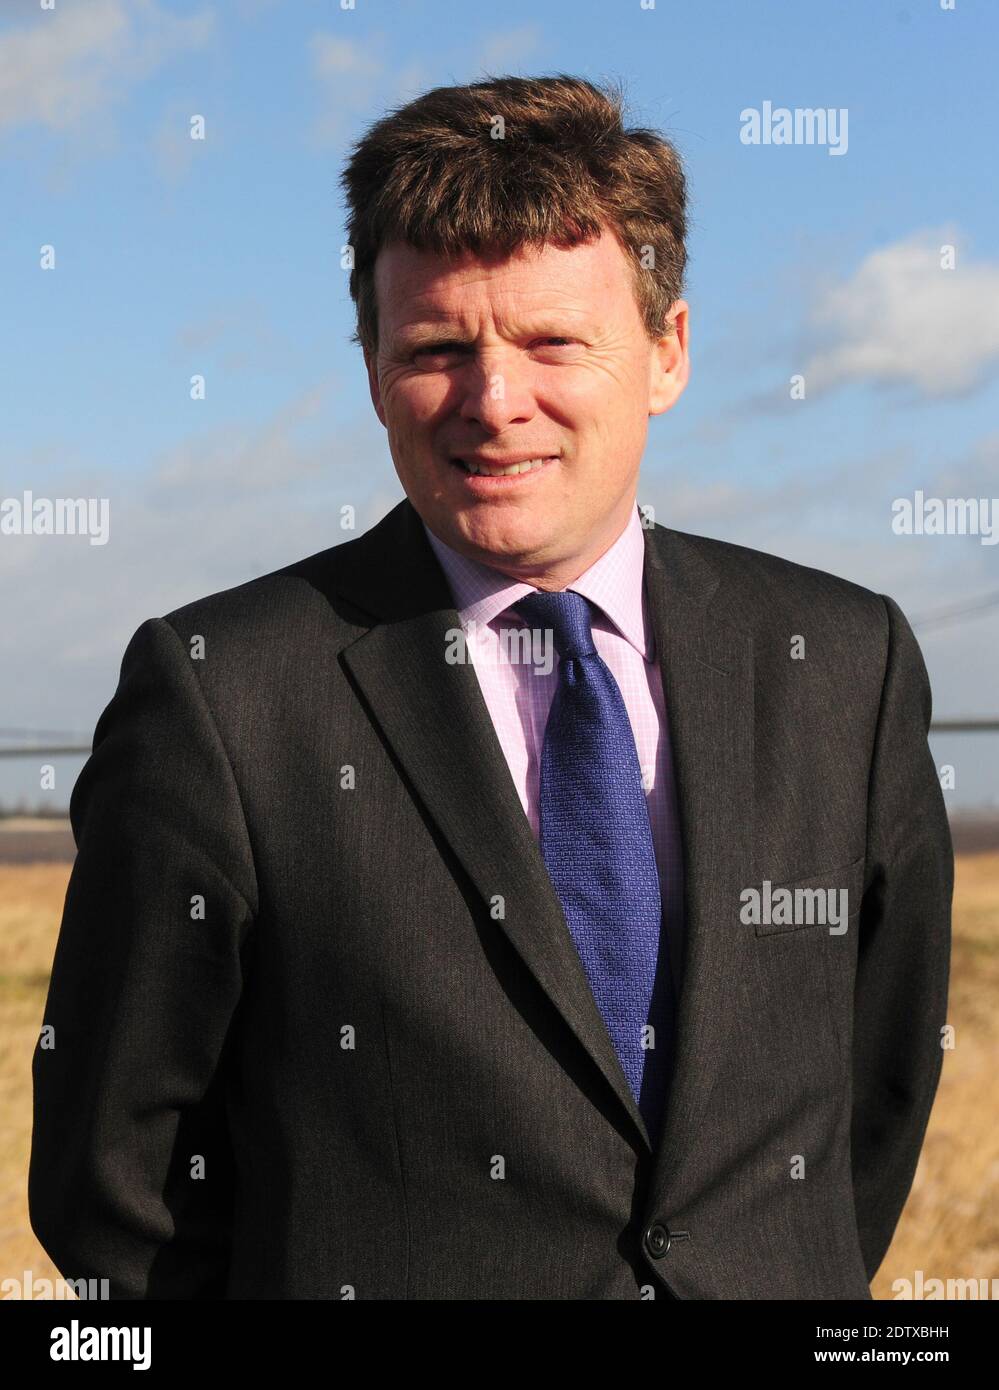 File photo dated 31/01/13 of former Environment minister Richard Benyon, who has been appointed as a life peer in the House of Lords. Stock Photo